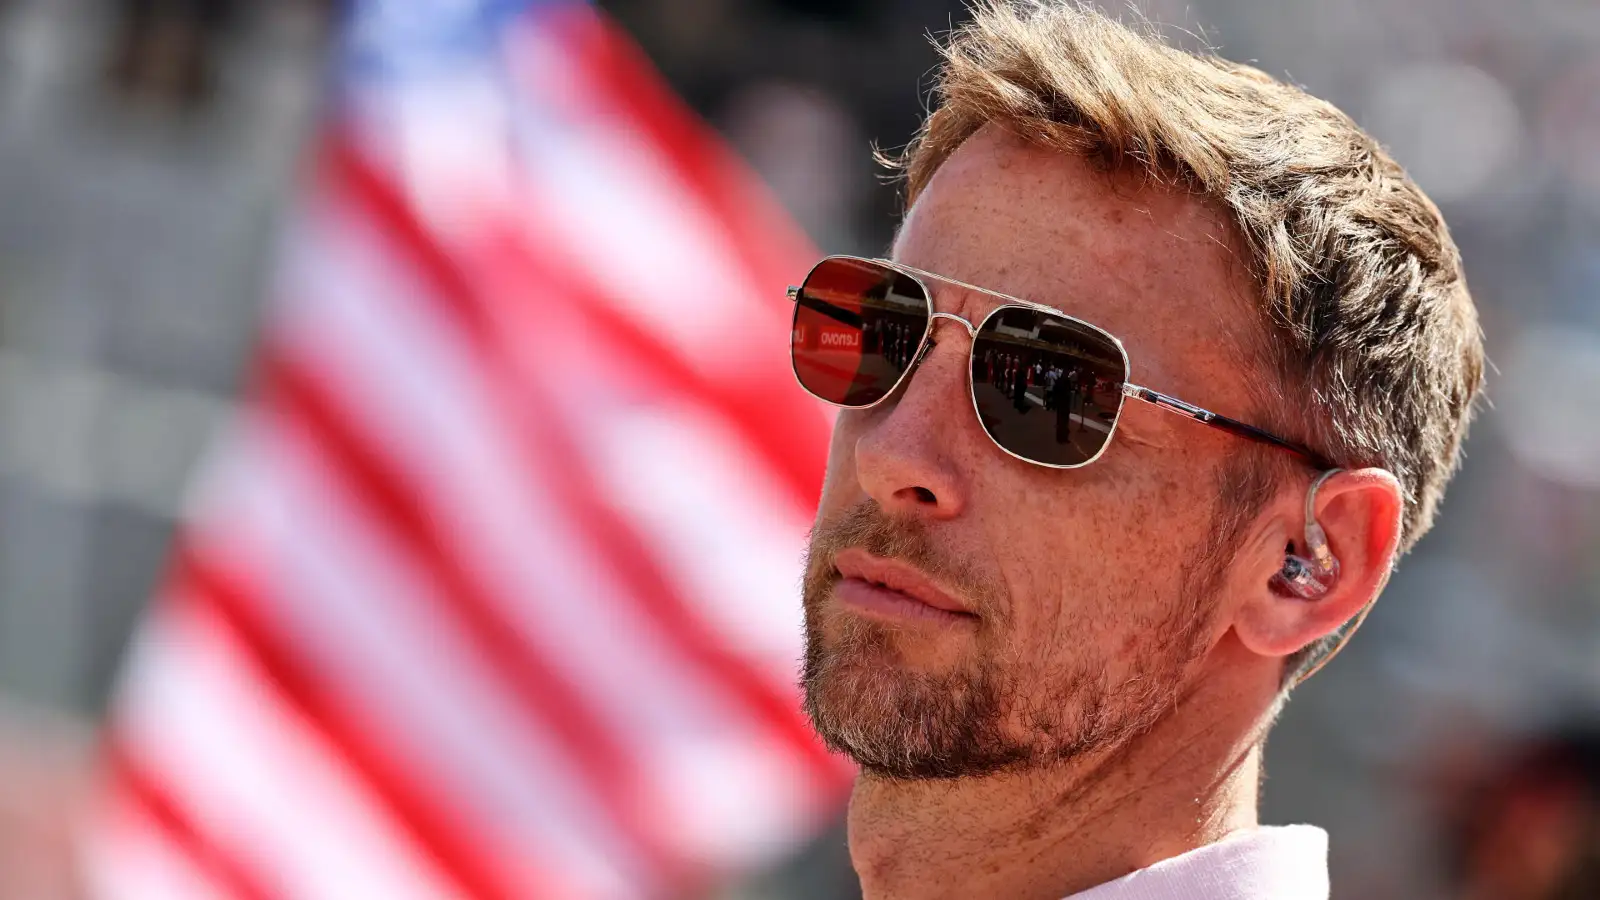 Jenson Button looks on as he works for Sky F1 during the United States Grand Prix.